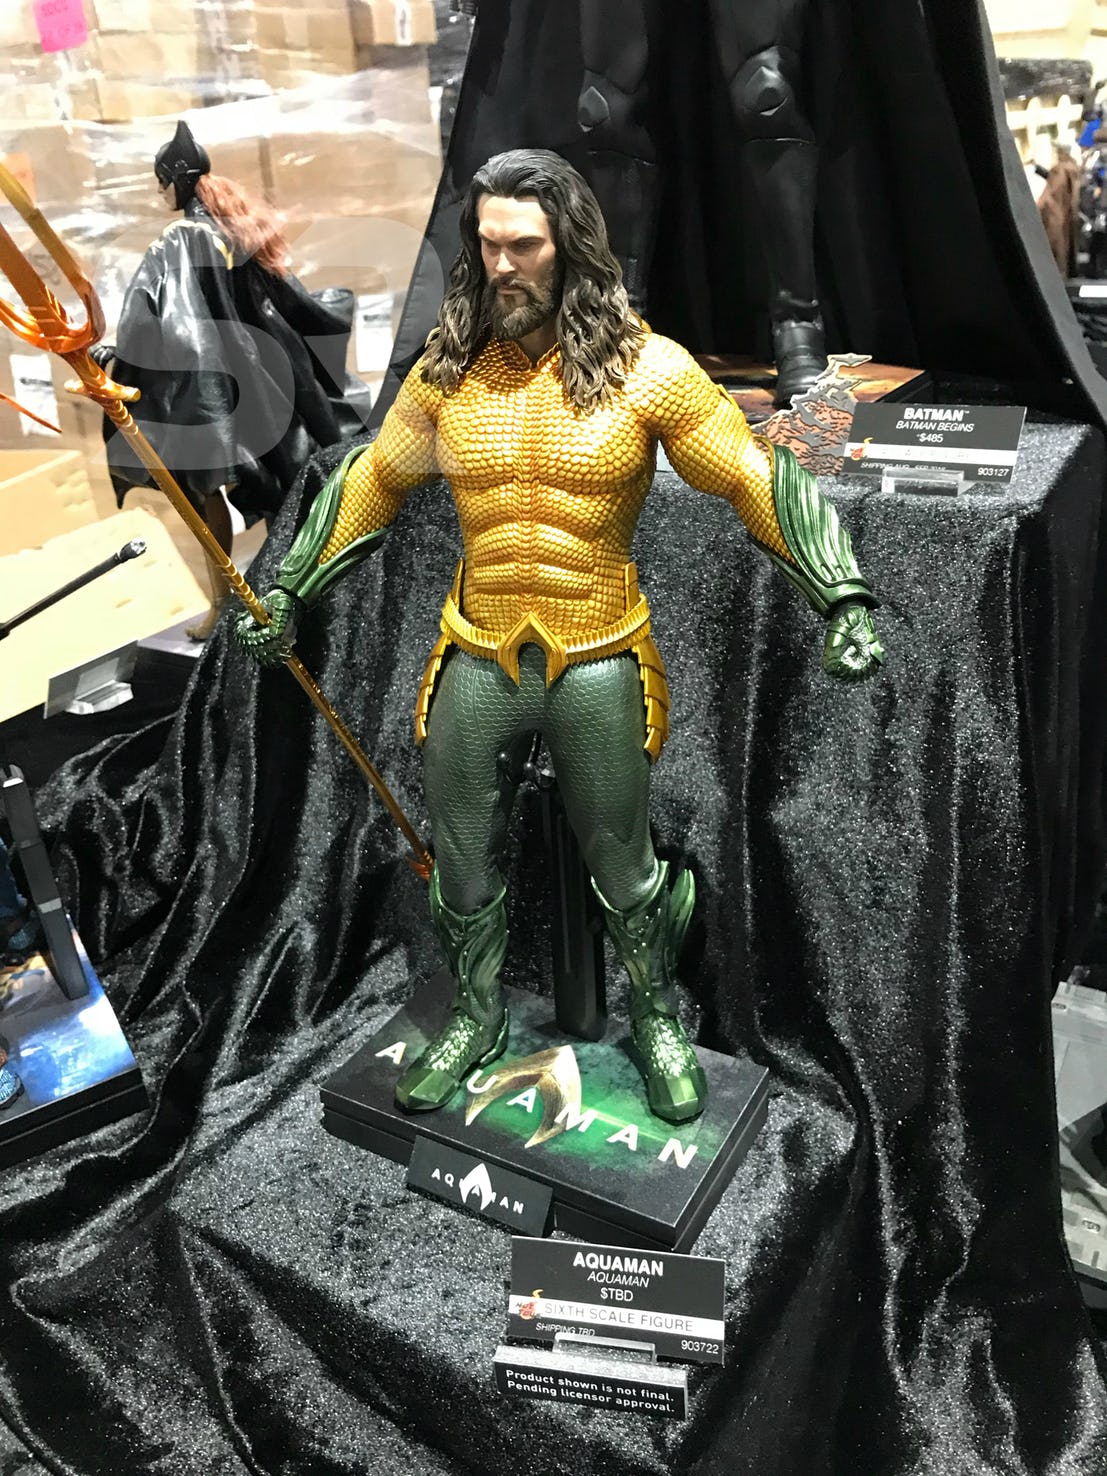 Aquaman-Sideshow-Collectible-Figure-Classic-Costume-and-Trident-SR.jpg